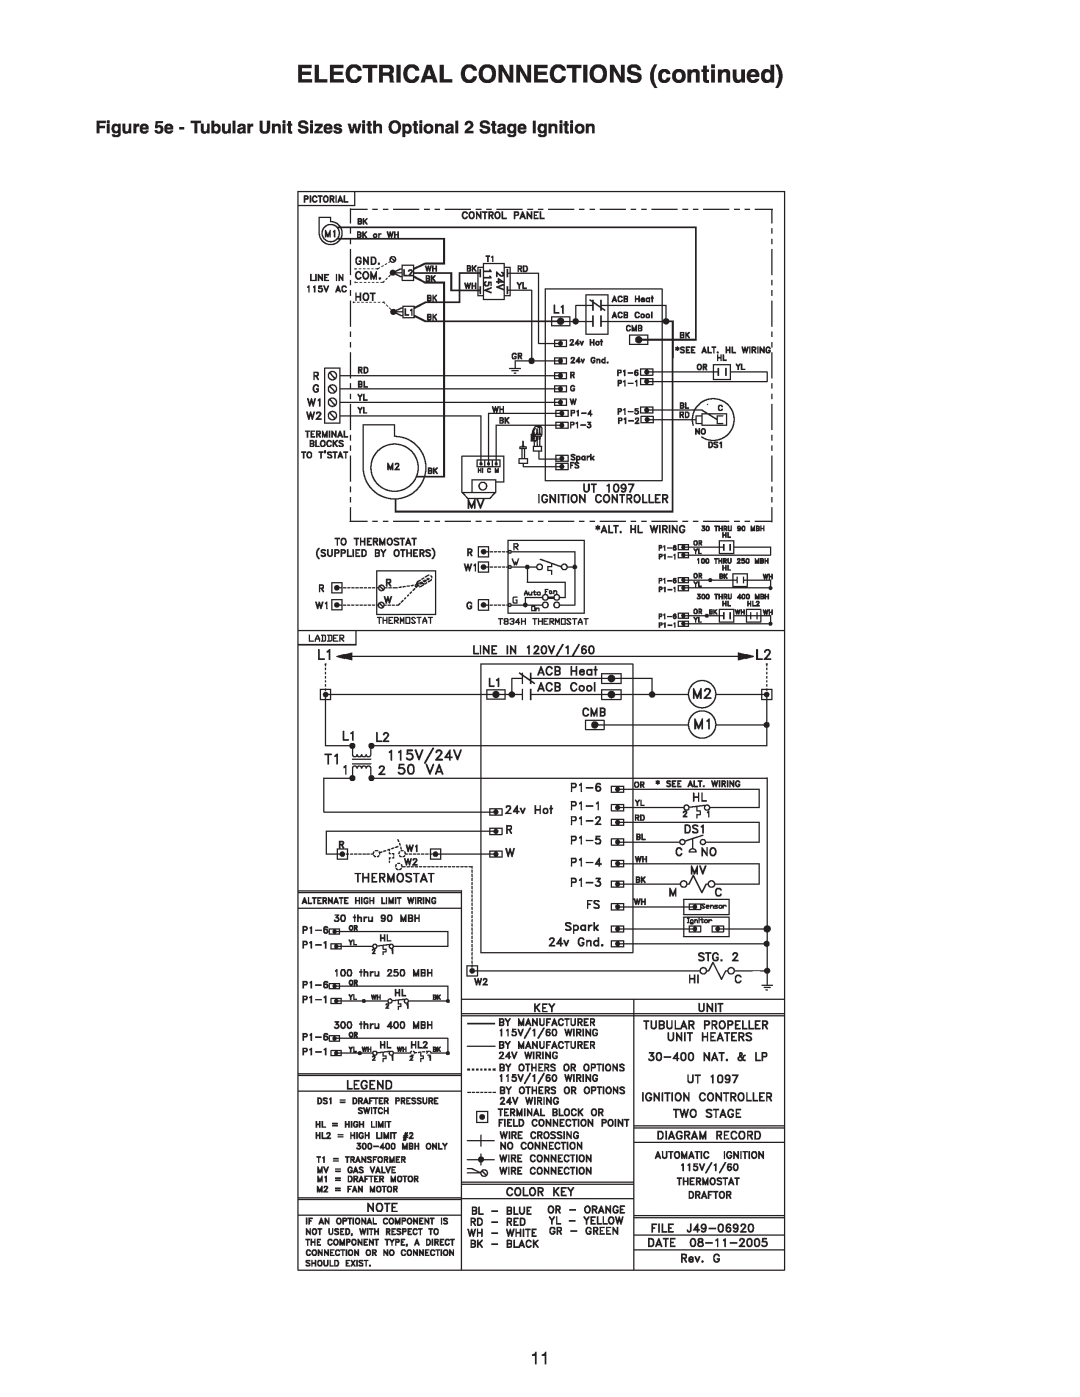 Sterling TF-100, TF-400, TF-150, TF-300, TF-200, TF-350, TF-175, TF-250, TF-125, GF-400, GF-250 ELECTRICAL CONNECTIONS continued 